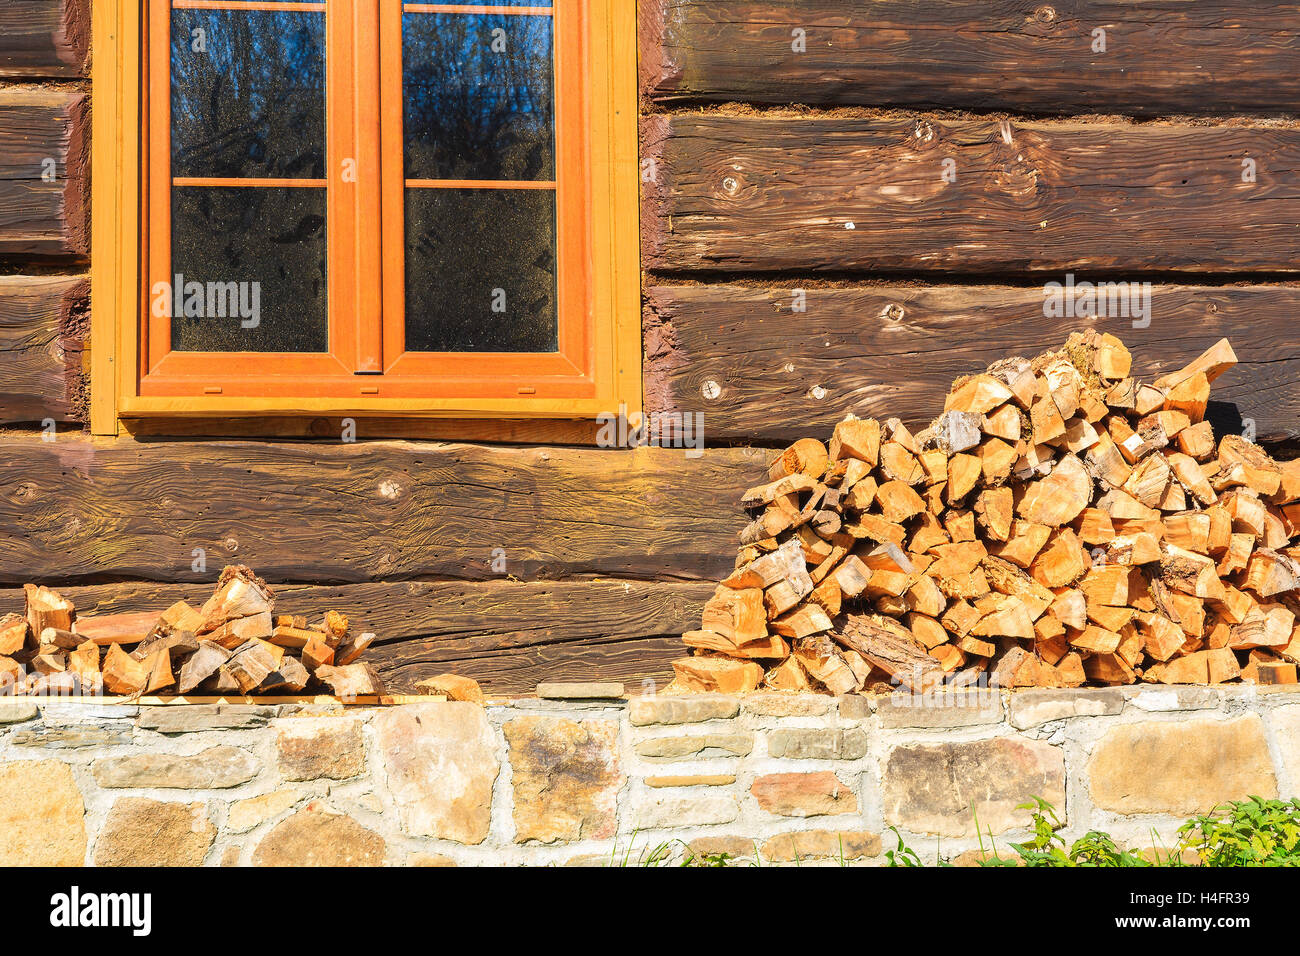 Pile of firewood stacked up in front of a house in Beskid Niski Mountains, Poland Stock Photo